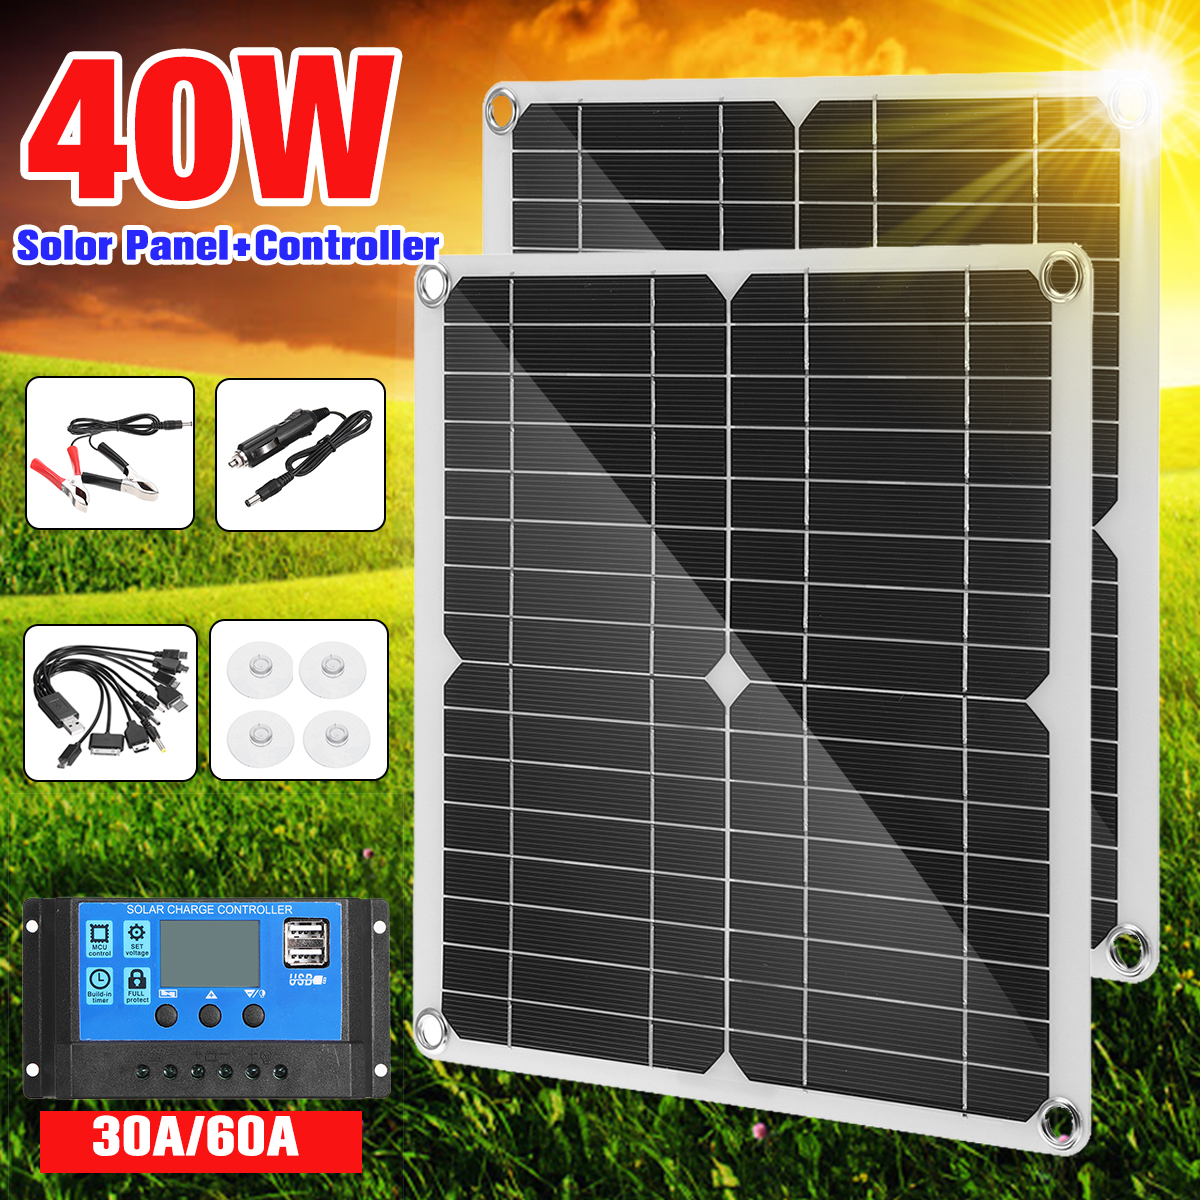 40W-Portable-Solar-Panel-Kit-Battery-Charger-Controller-Waterproof-For-Camping-Traveling-1830191-1